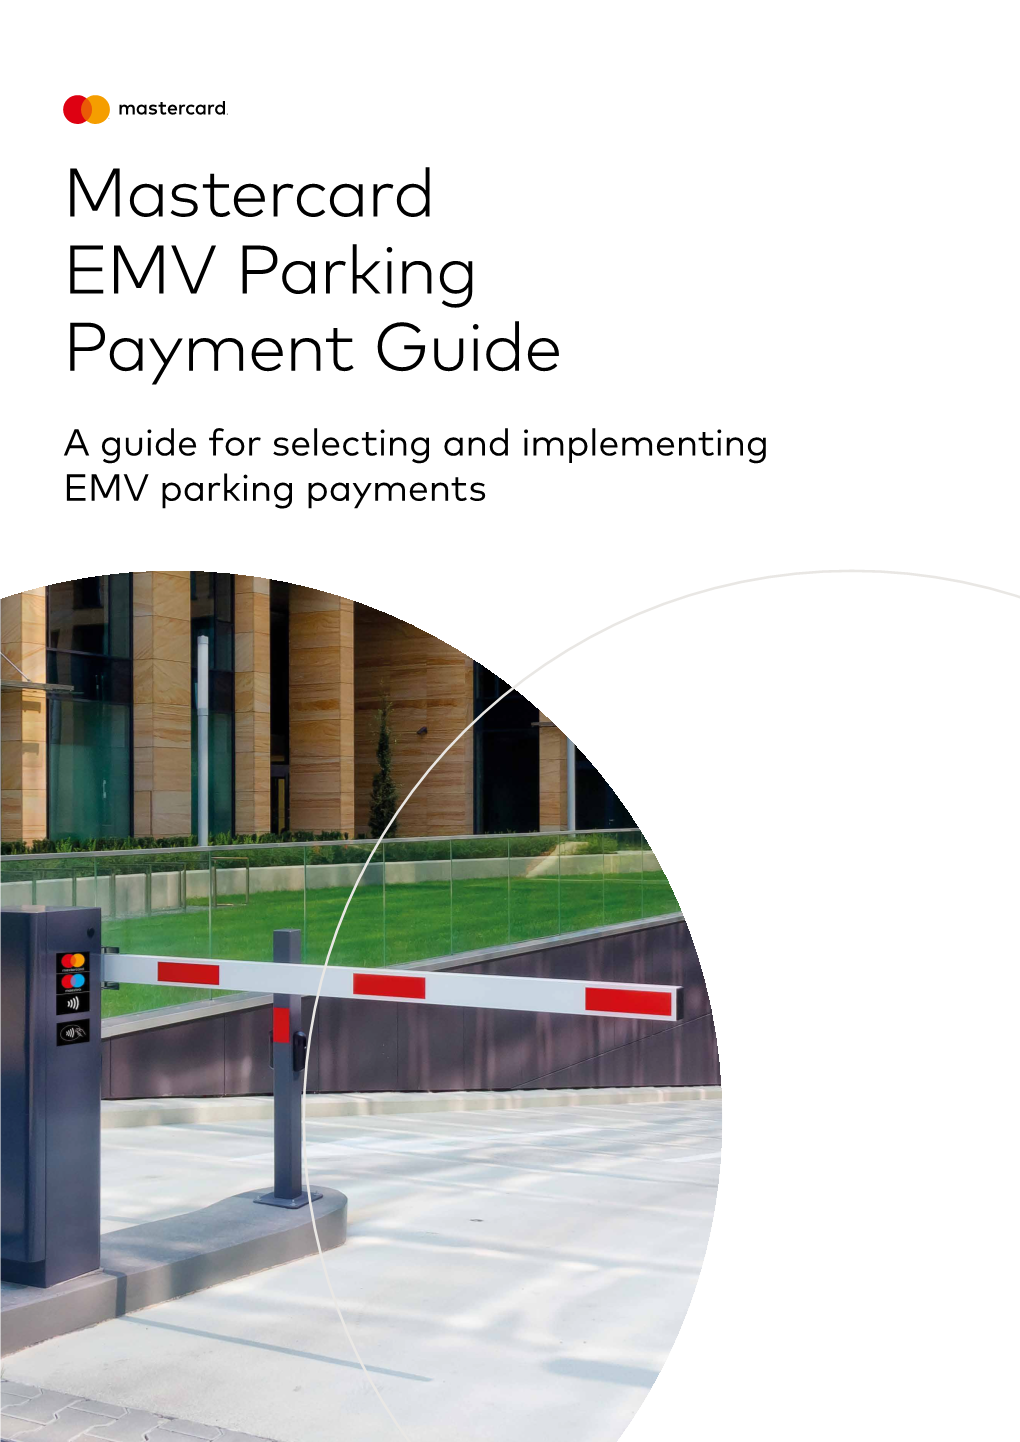 Mastercard EMV Parking Payment Guide